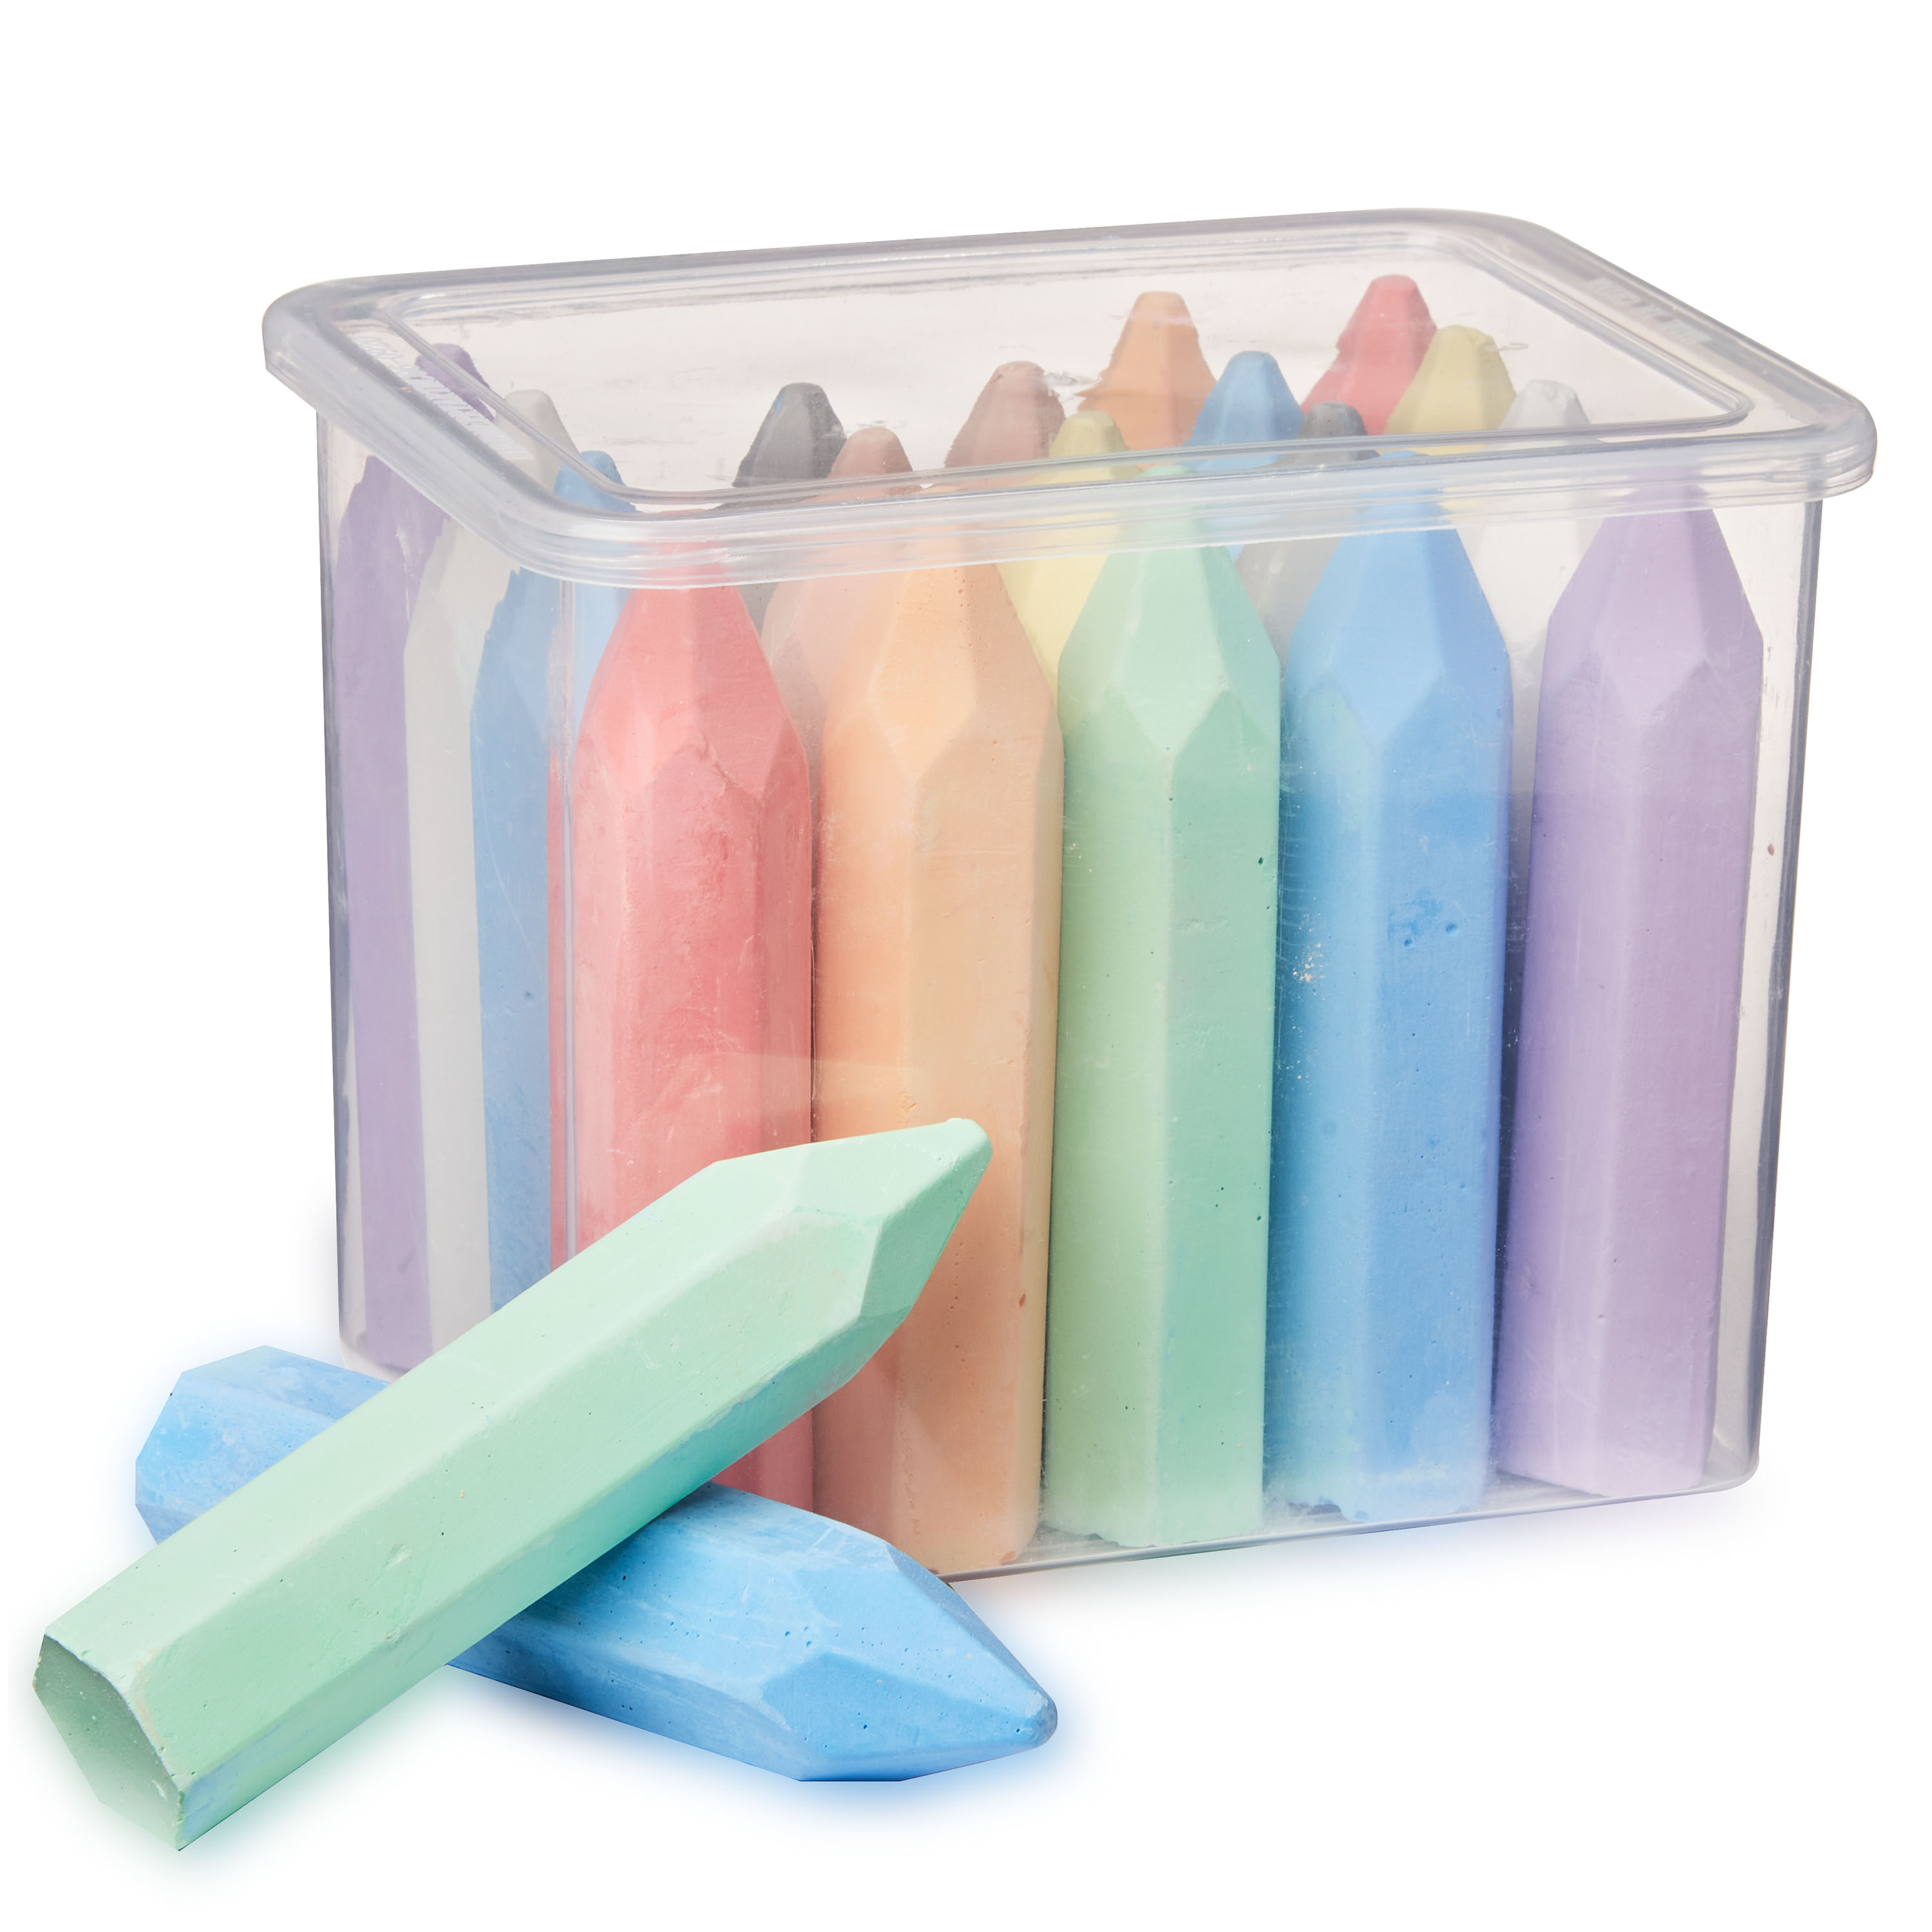 Play Day Sidewalk Chalk, 20 Pieces, Assorted Colors - image 1 of 5